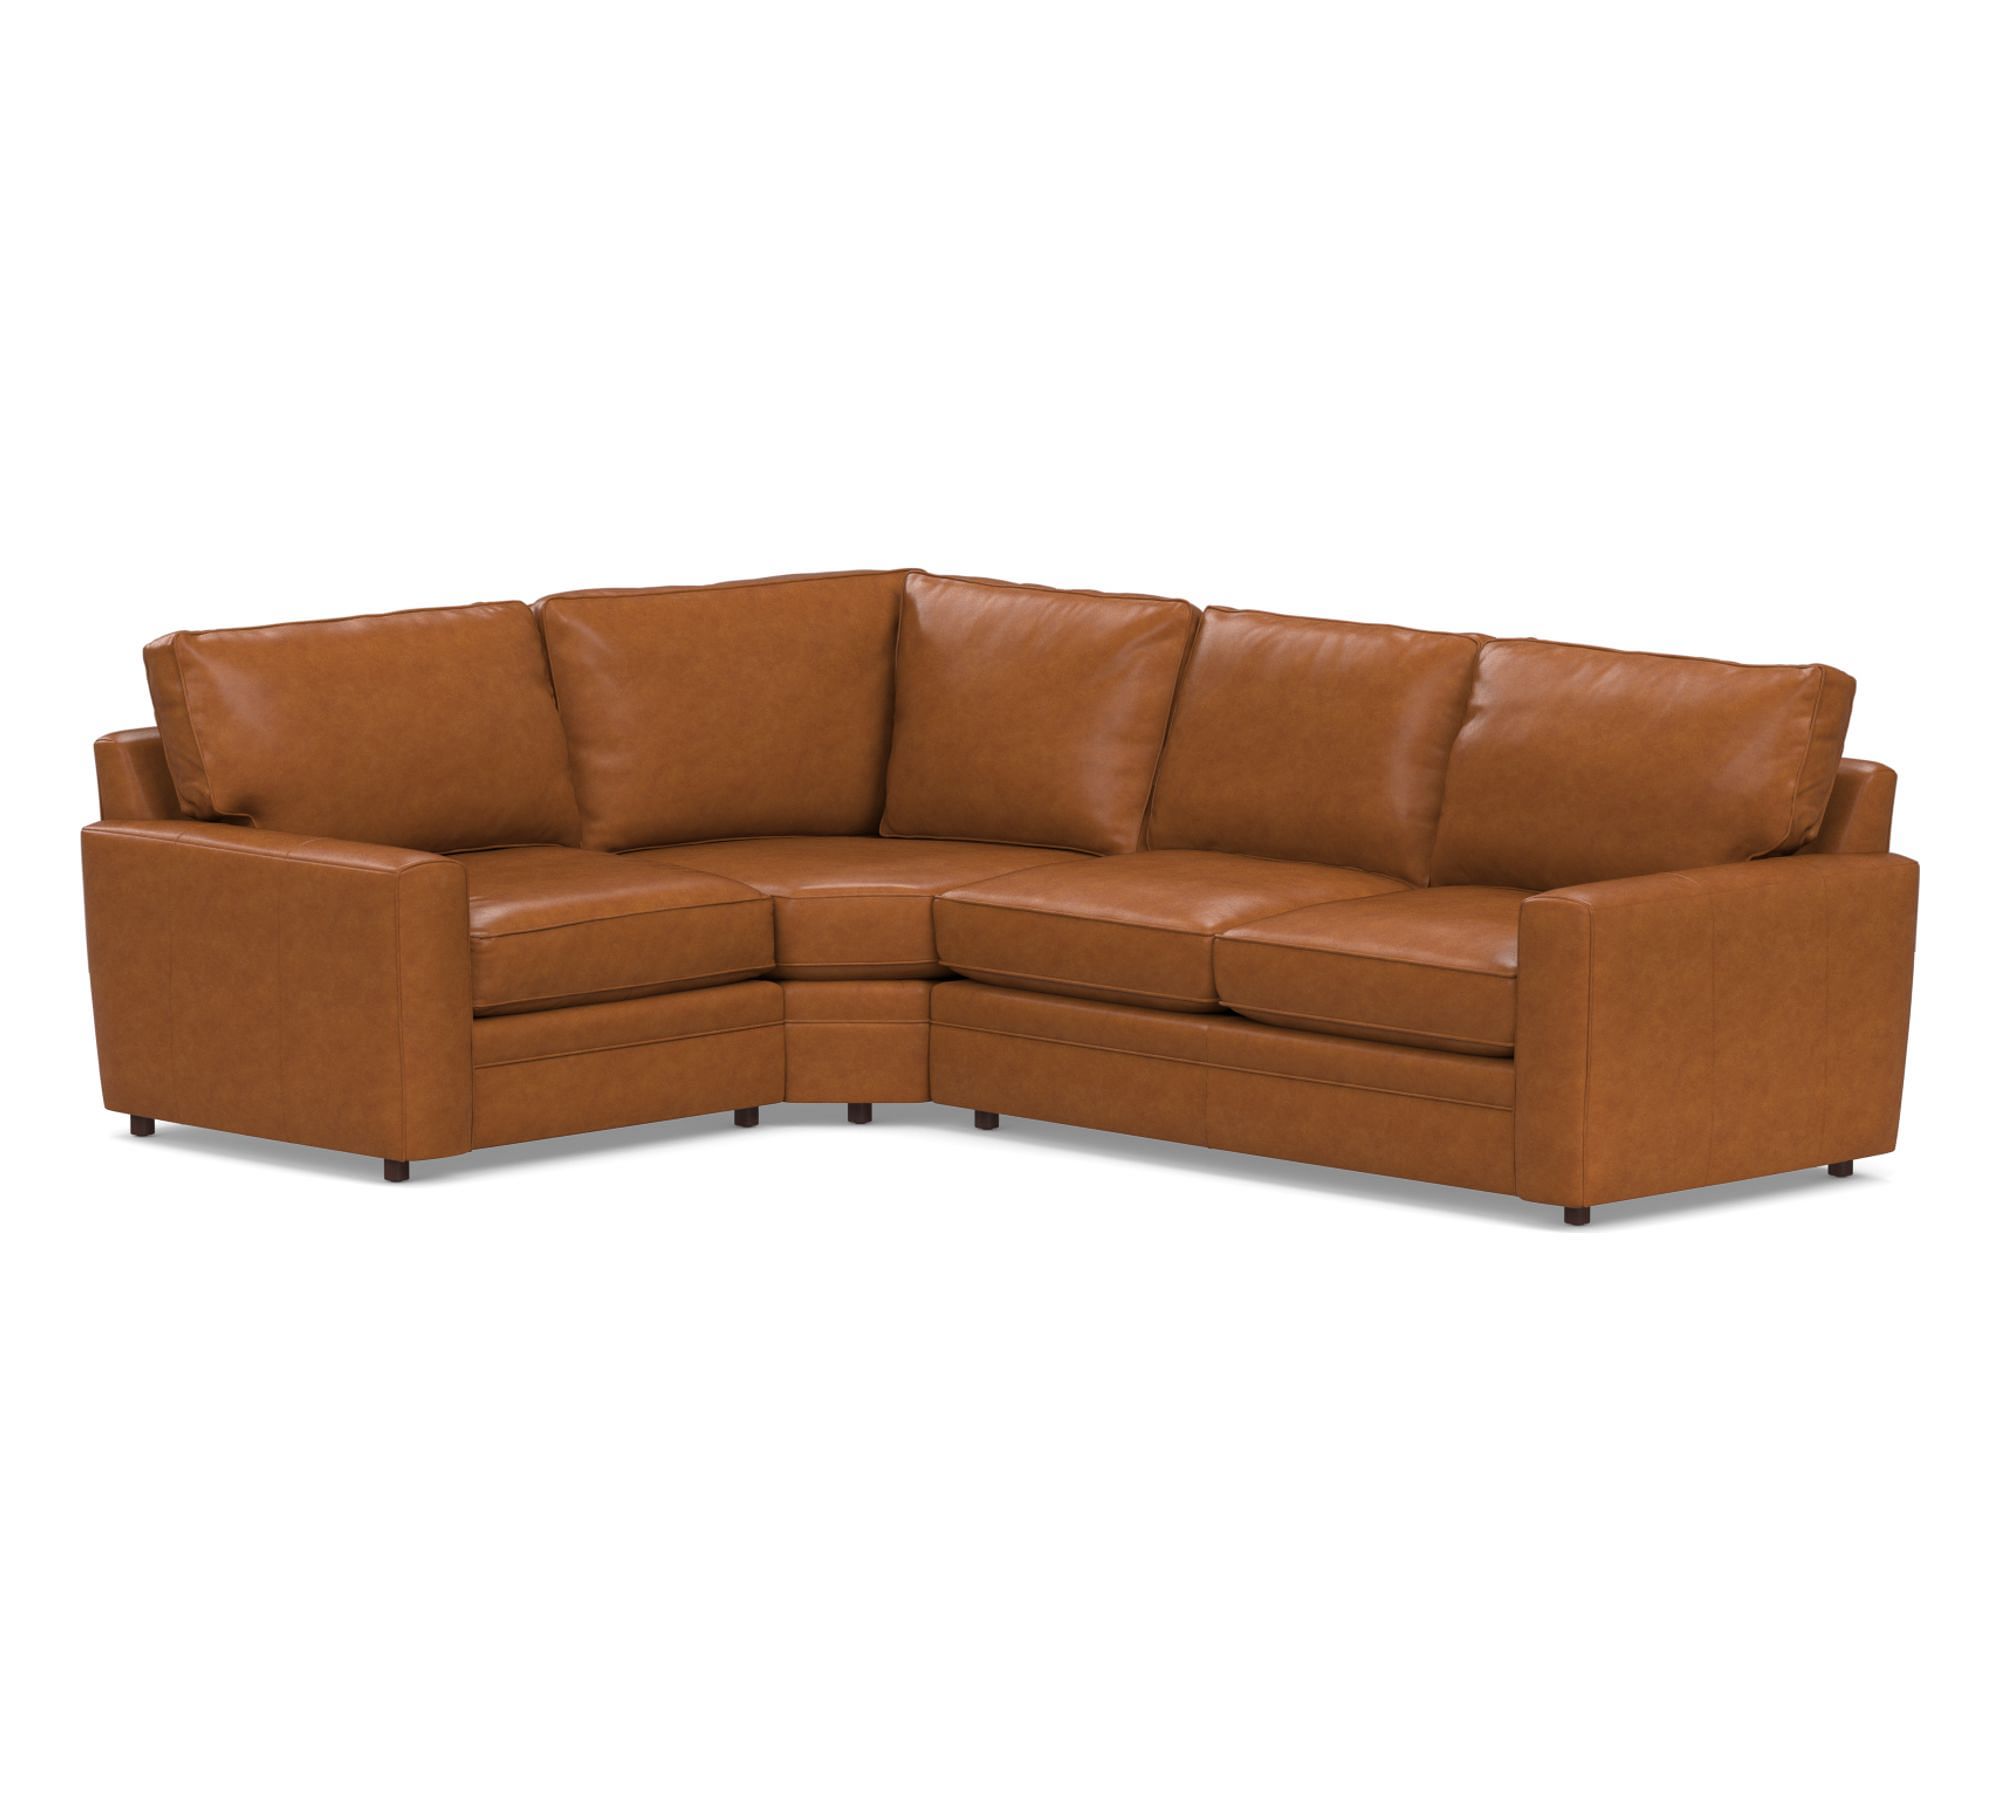 Pearce Square Arm Leather 3-Piece Wedge Sectional (120")